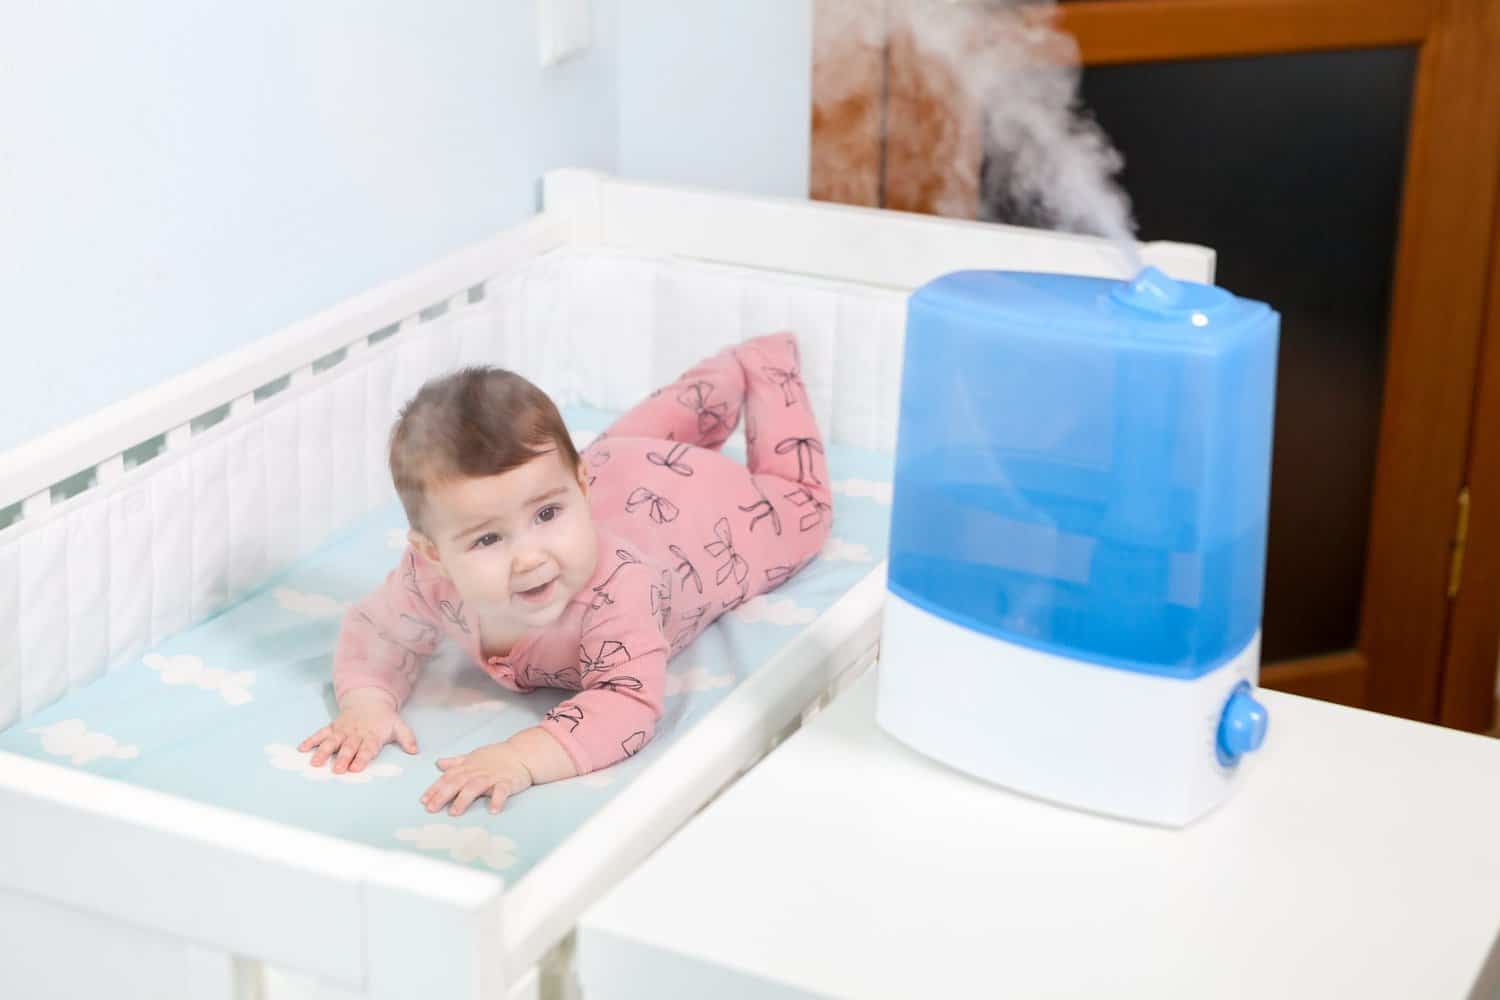 Air Purifier vs Humidifier for Baby: Which One is Better?